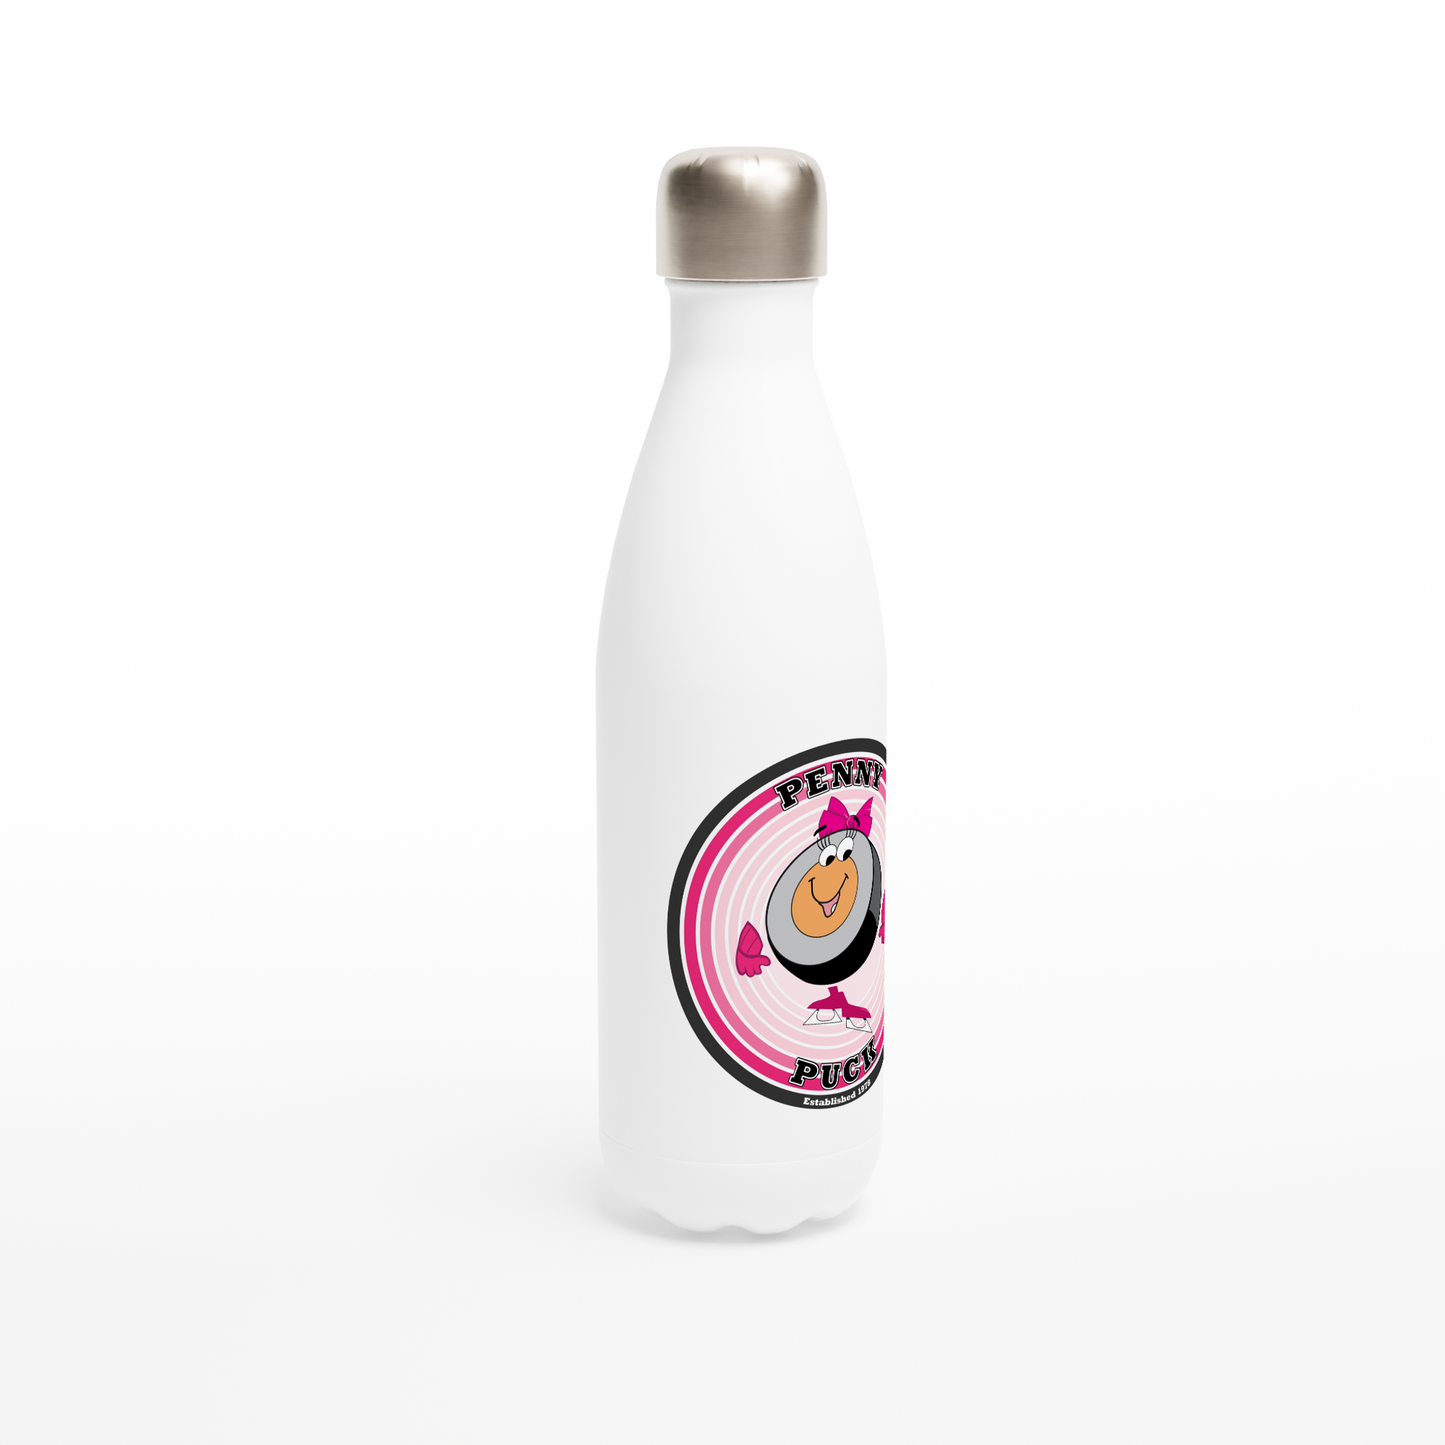 Penny Puck EST. 1978 White 17oz Stainless Steel Water Bottle